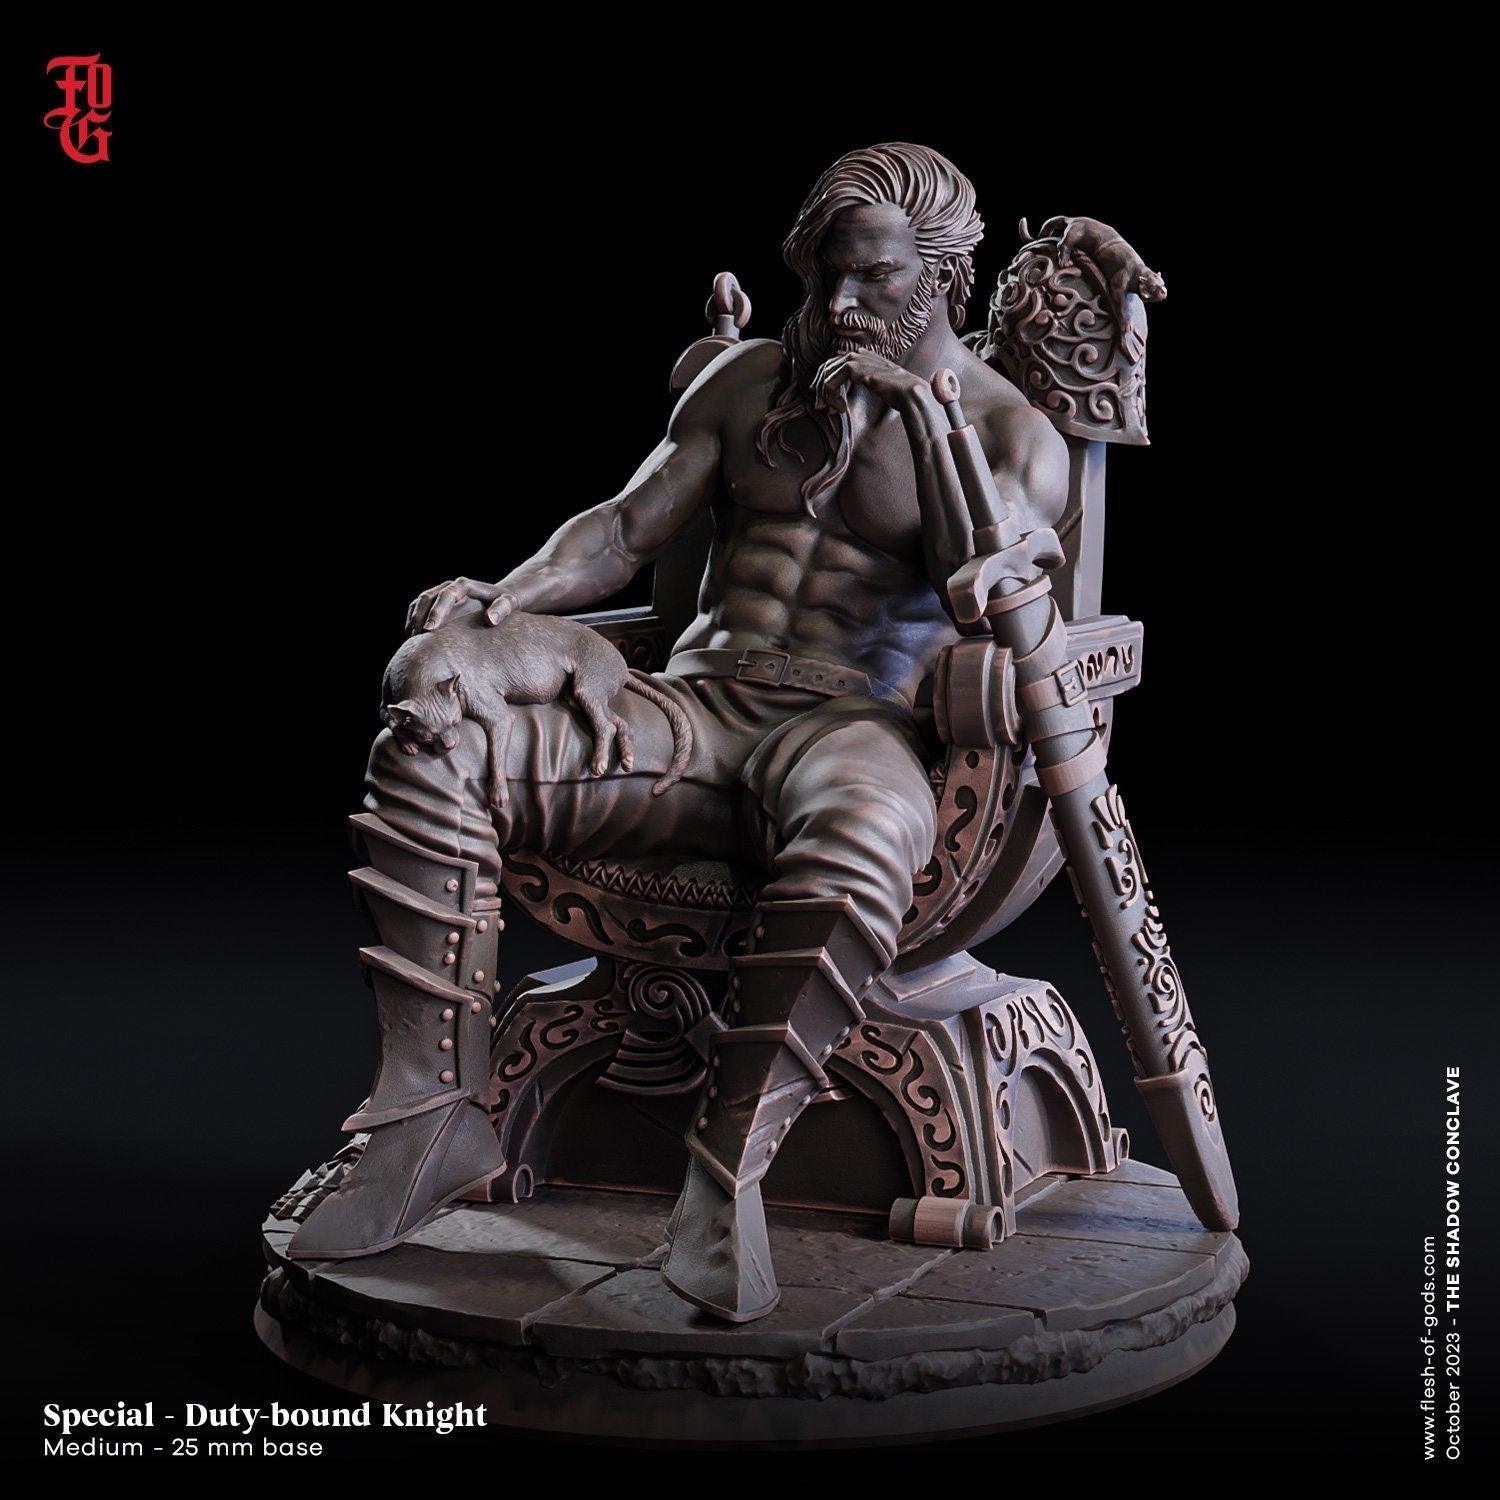 Duty-Bound DnD Knight Miniature | Honorable Human Knight Figurine | 32mm Scale - Plague Miniatures shop for DnD Miniatures